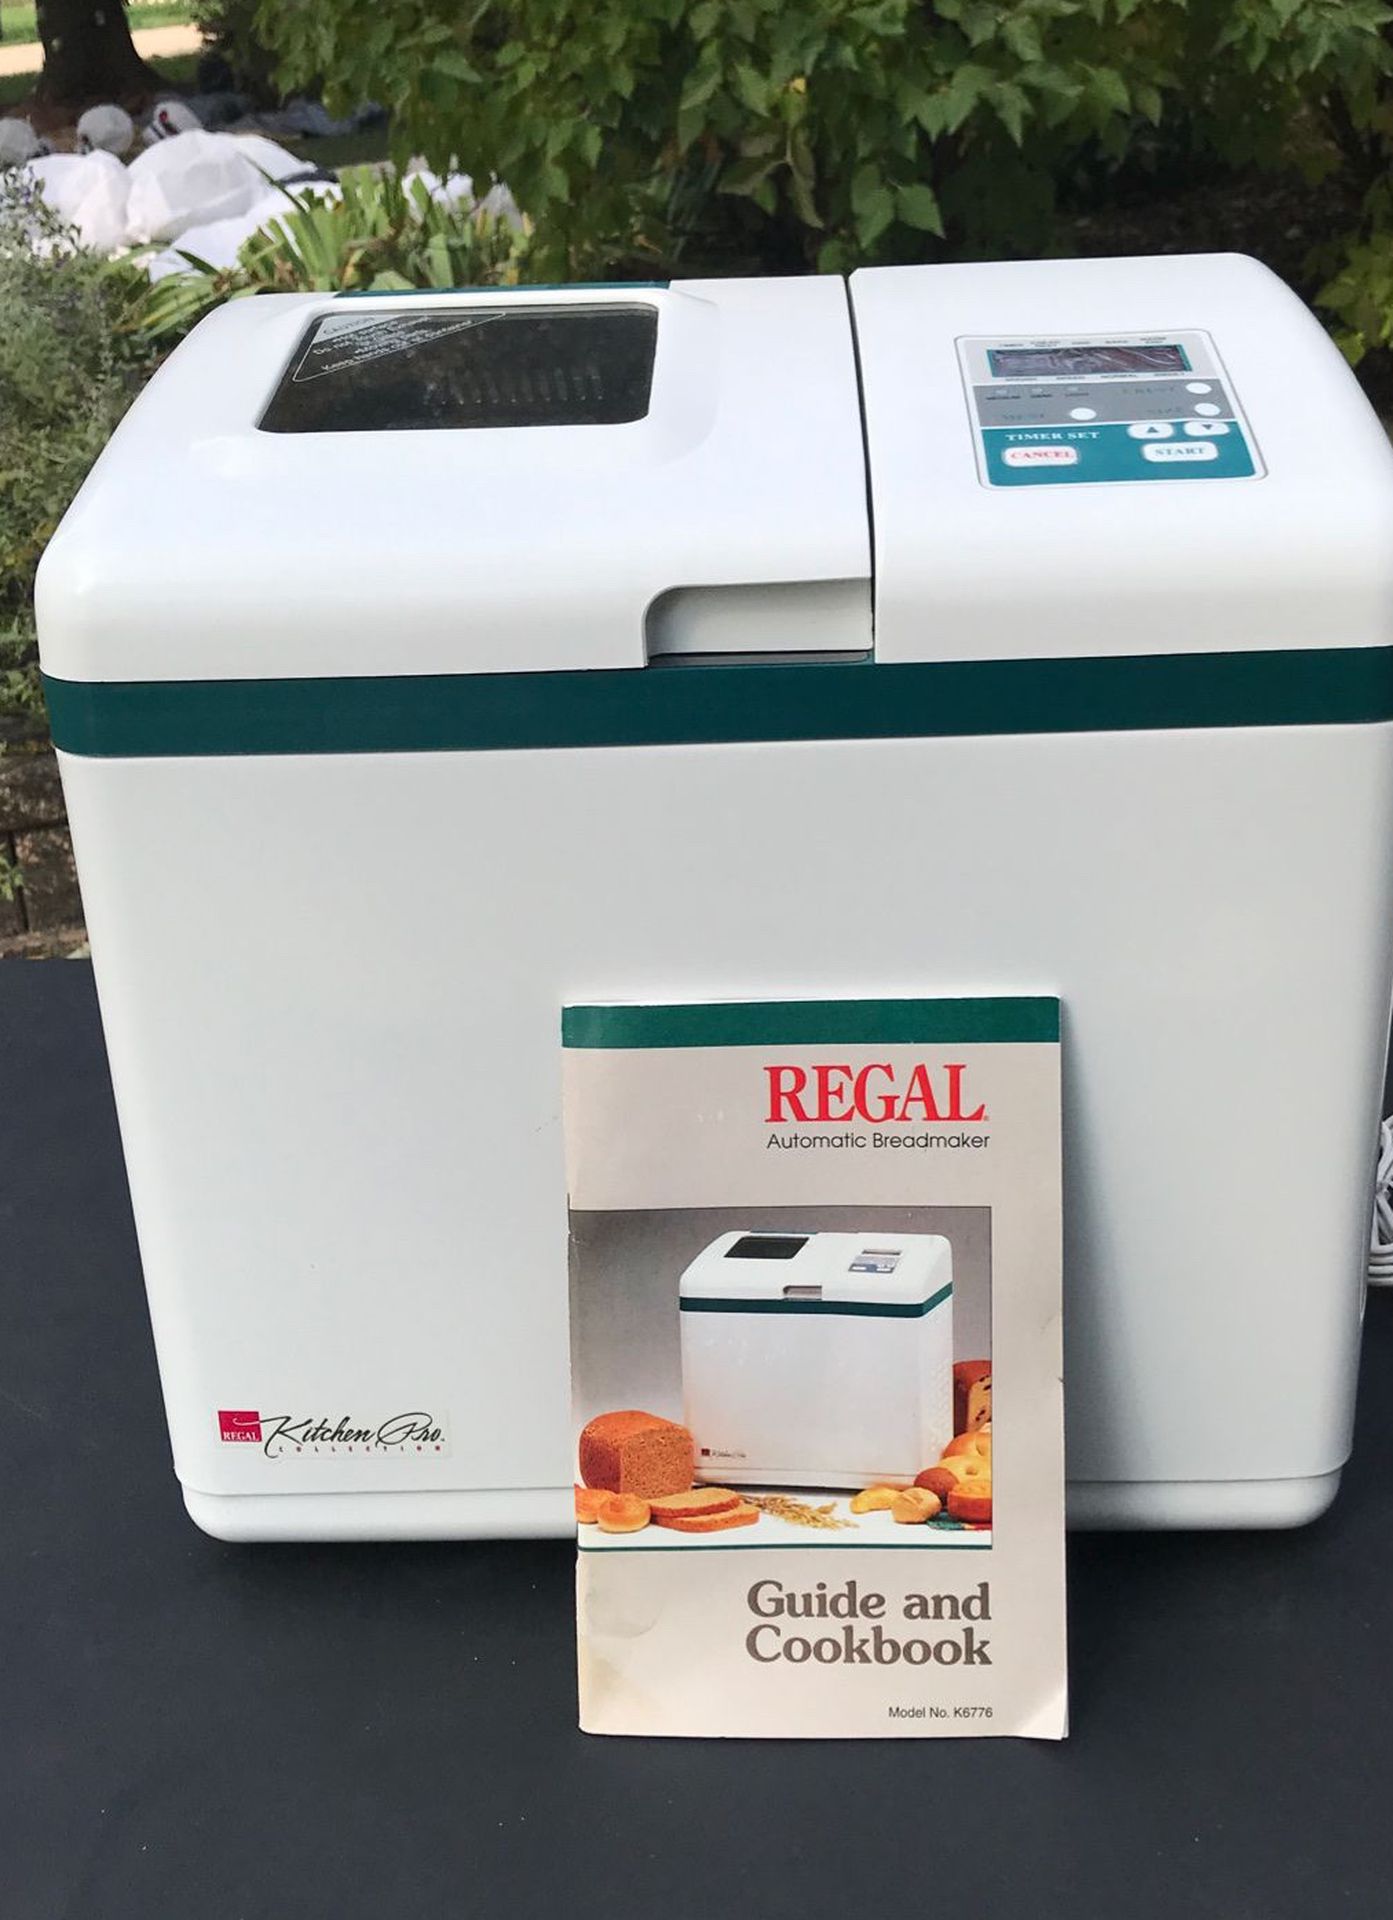 Regal automatic bread maker large capacity. Used sold as is